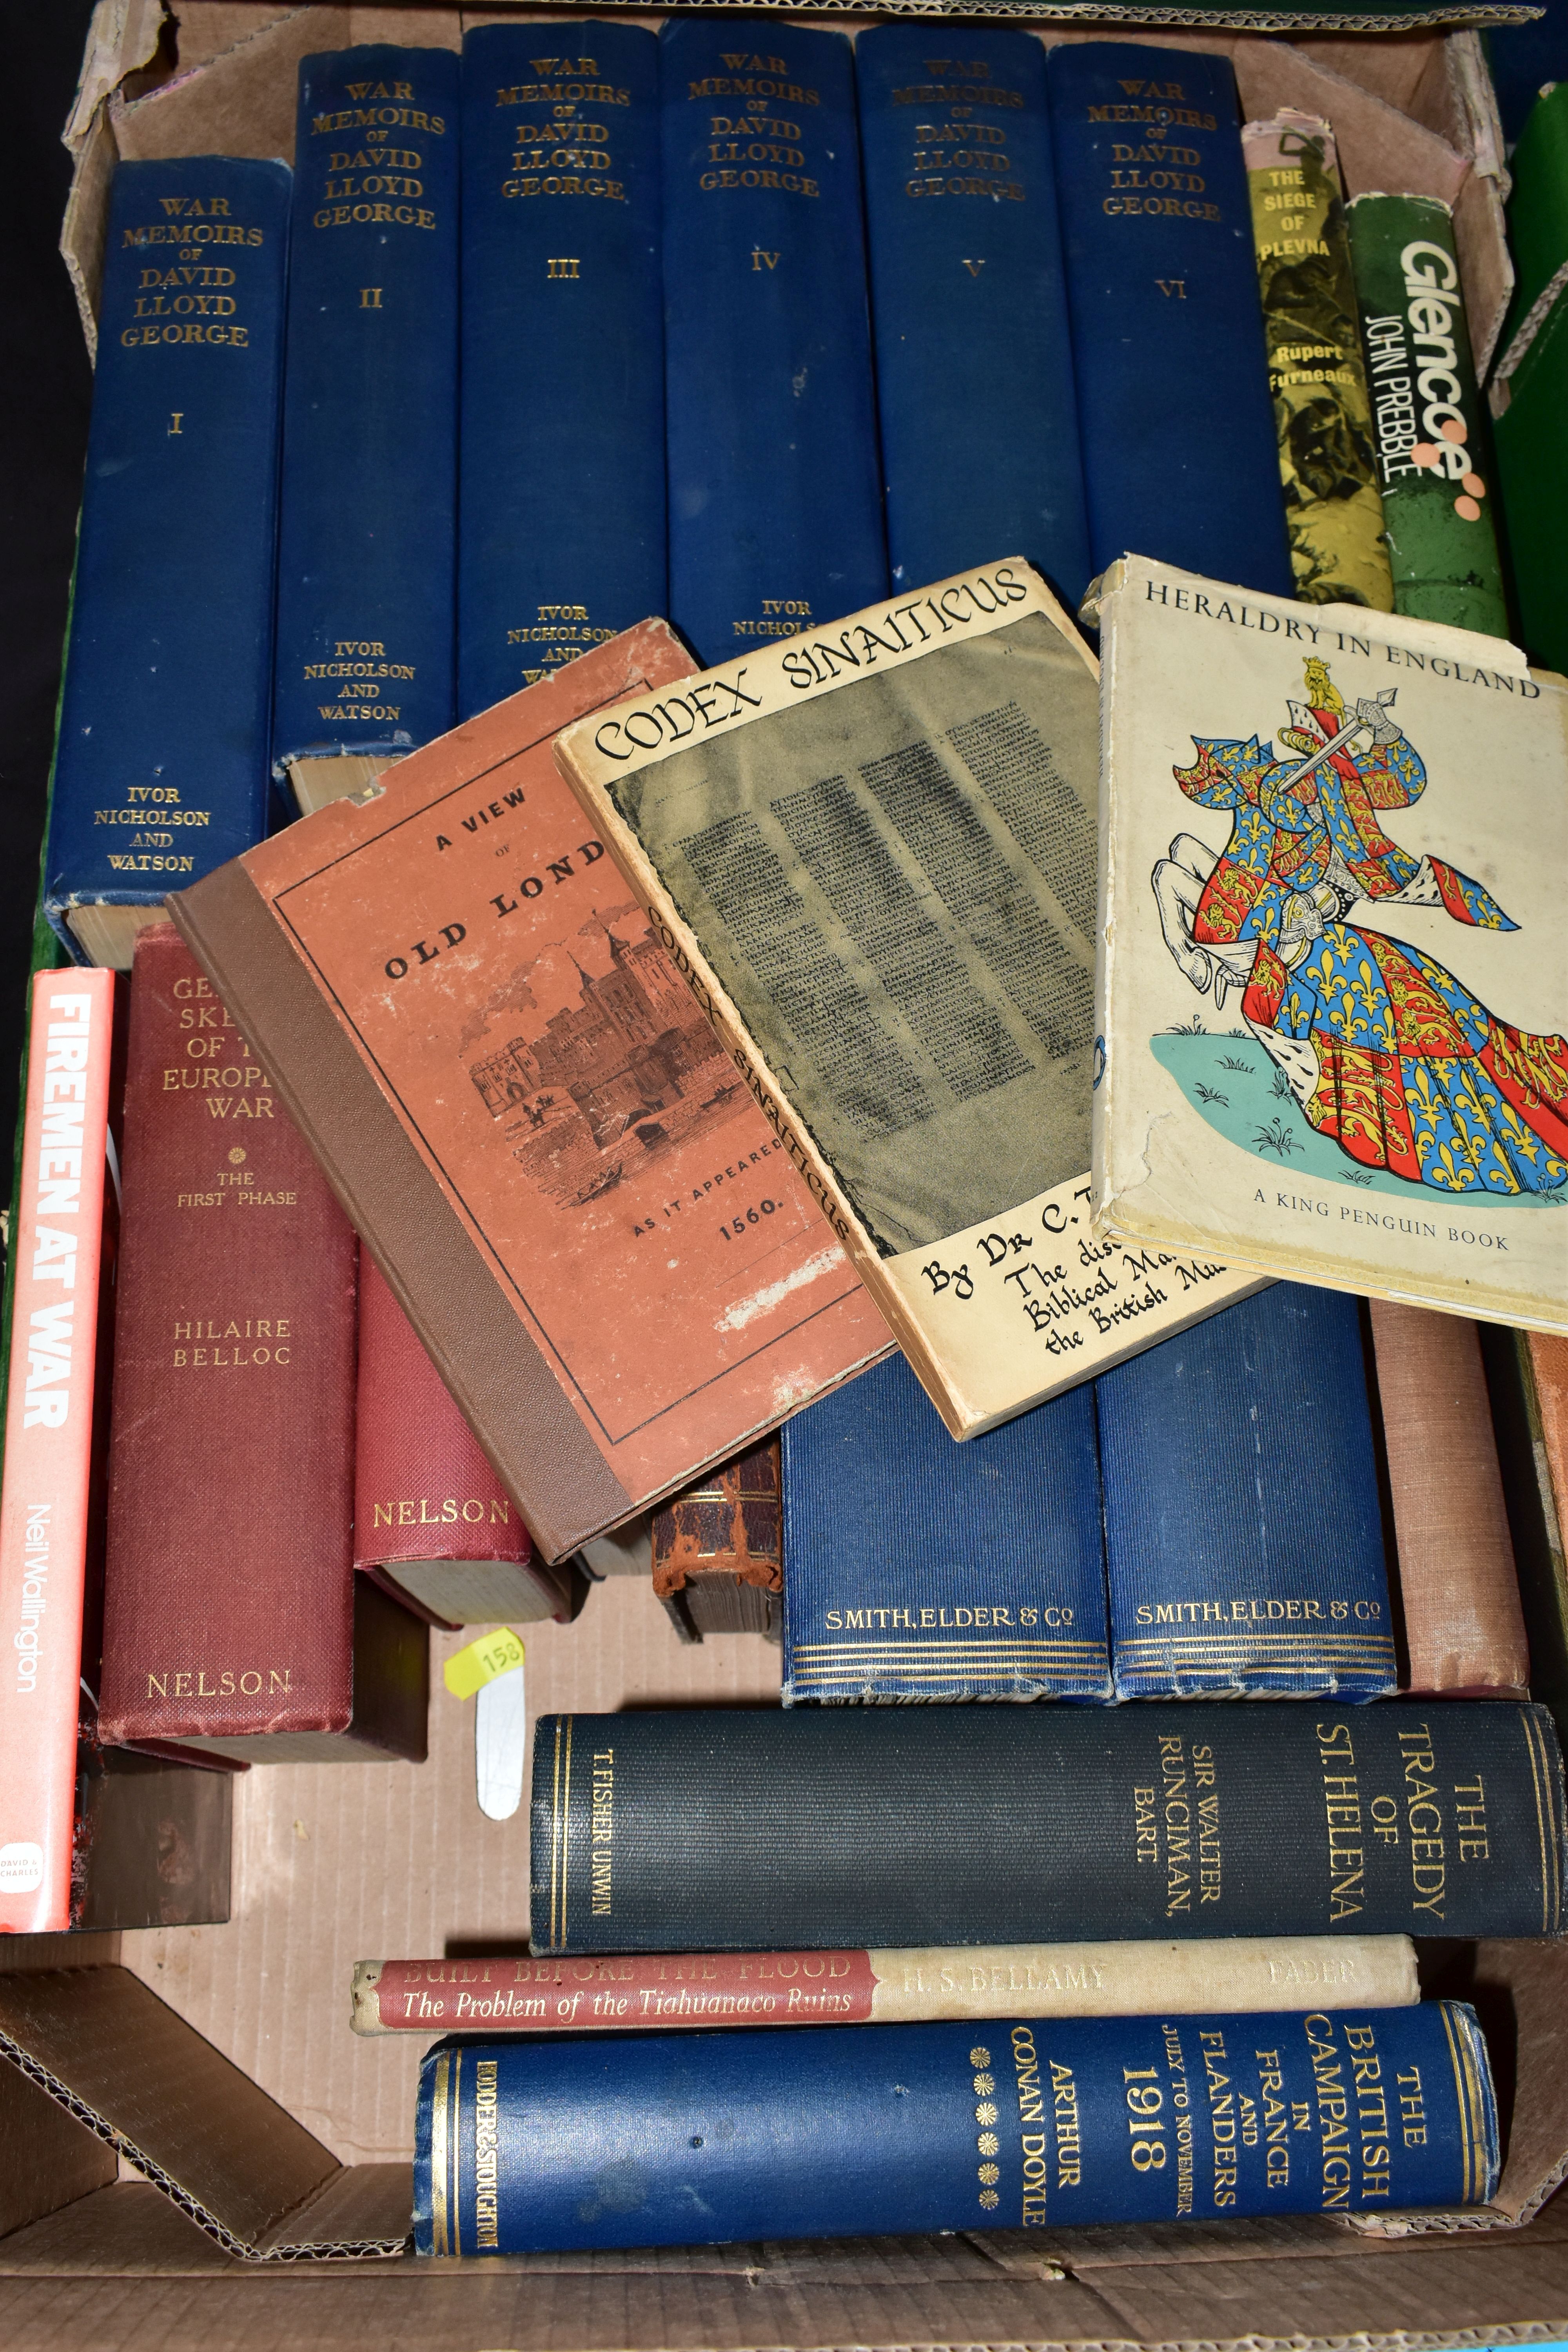 BOOKS, Antiquarian and early 20th century, Historical, Geographical and Religious titles, five boxes - Image 4 of 9